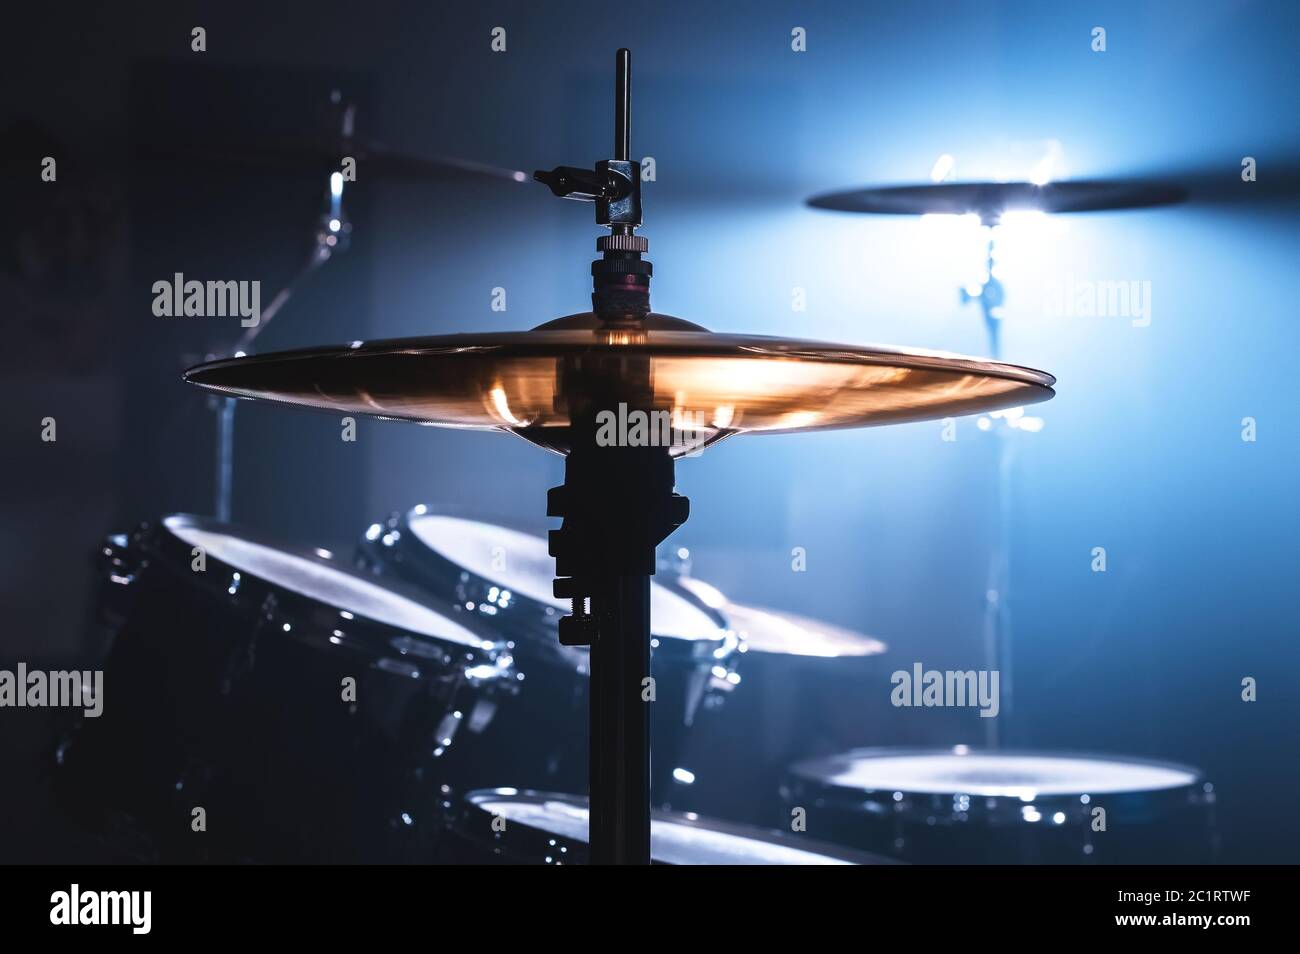 Bang A Drum High Resolution Stock Photography and Images - Alamy